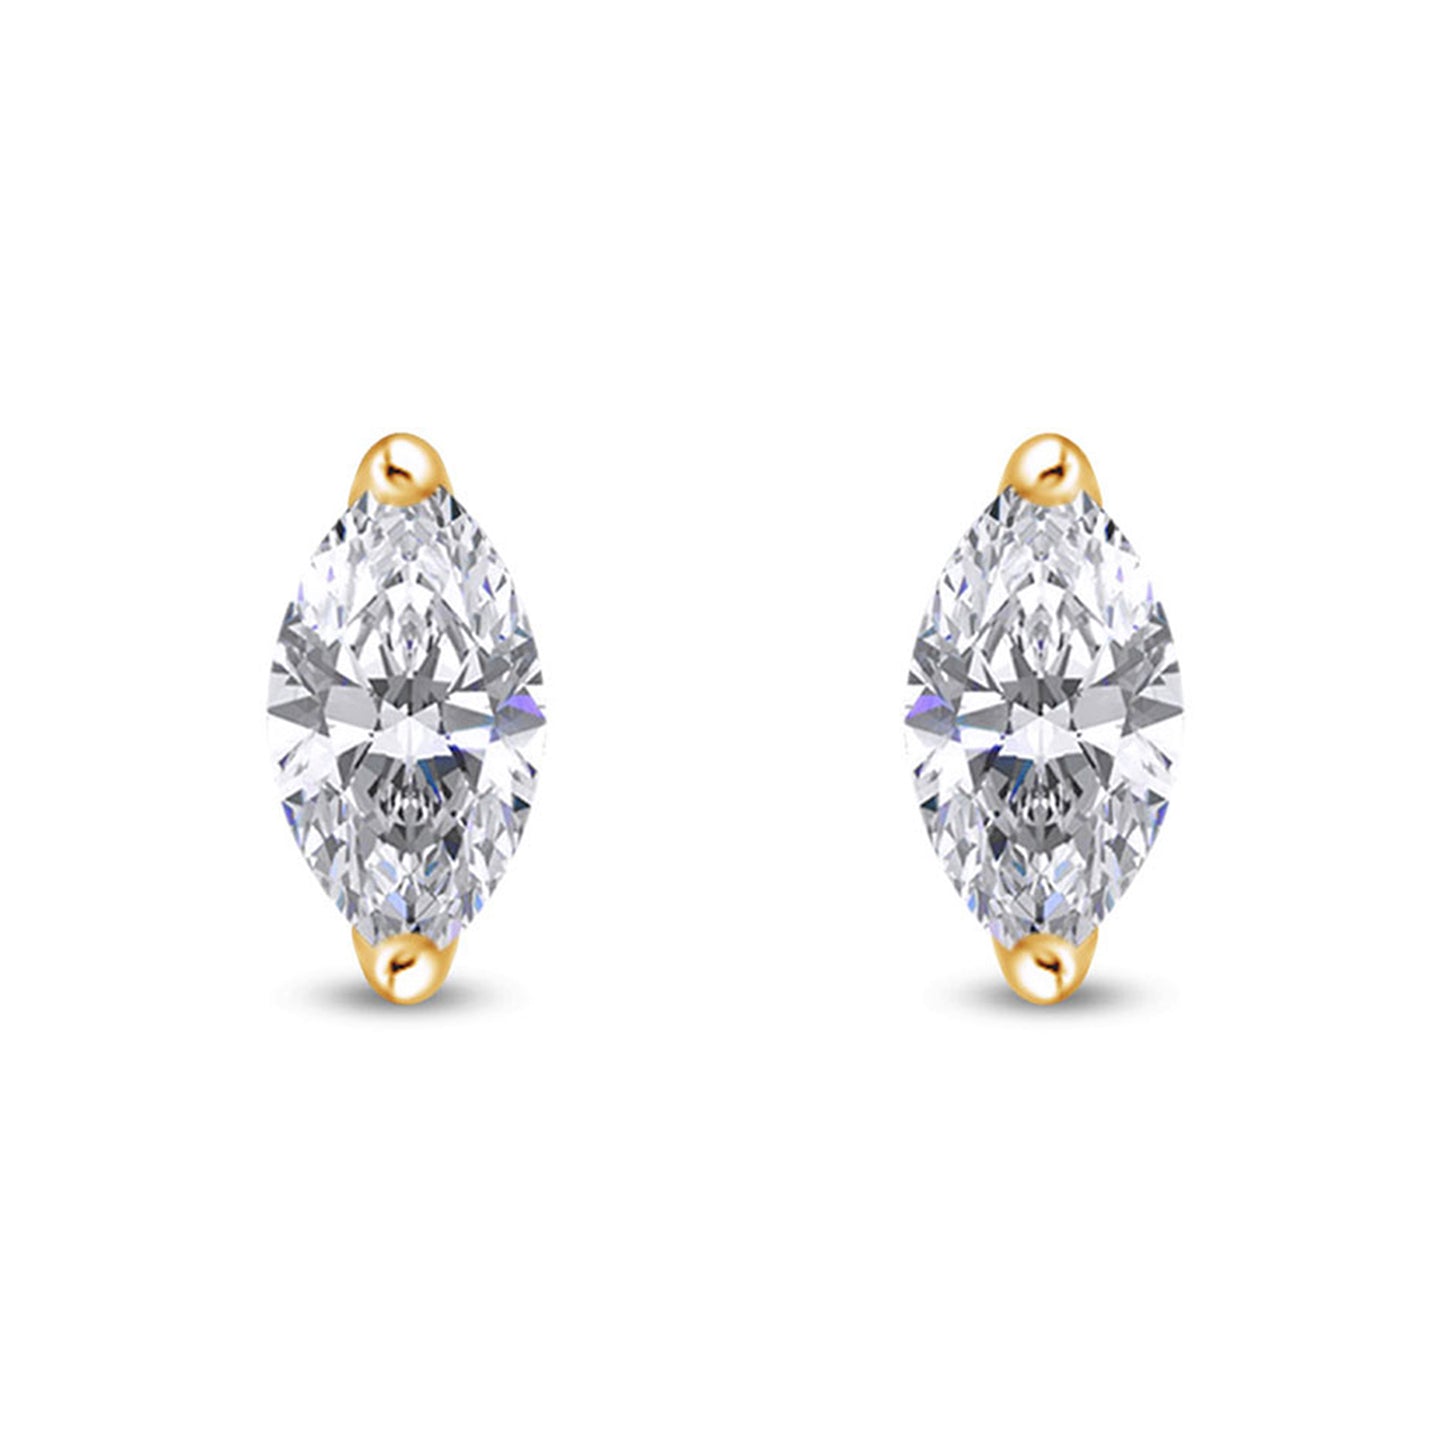 Sparkling White Cubic Zirconia Marquise Frame Stud Earrings in 14k Gold Over Sterling Silver Gift For Her